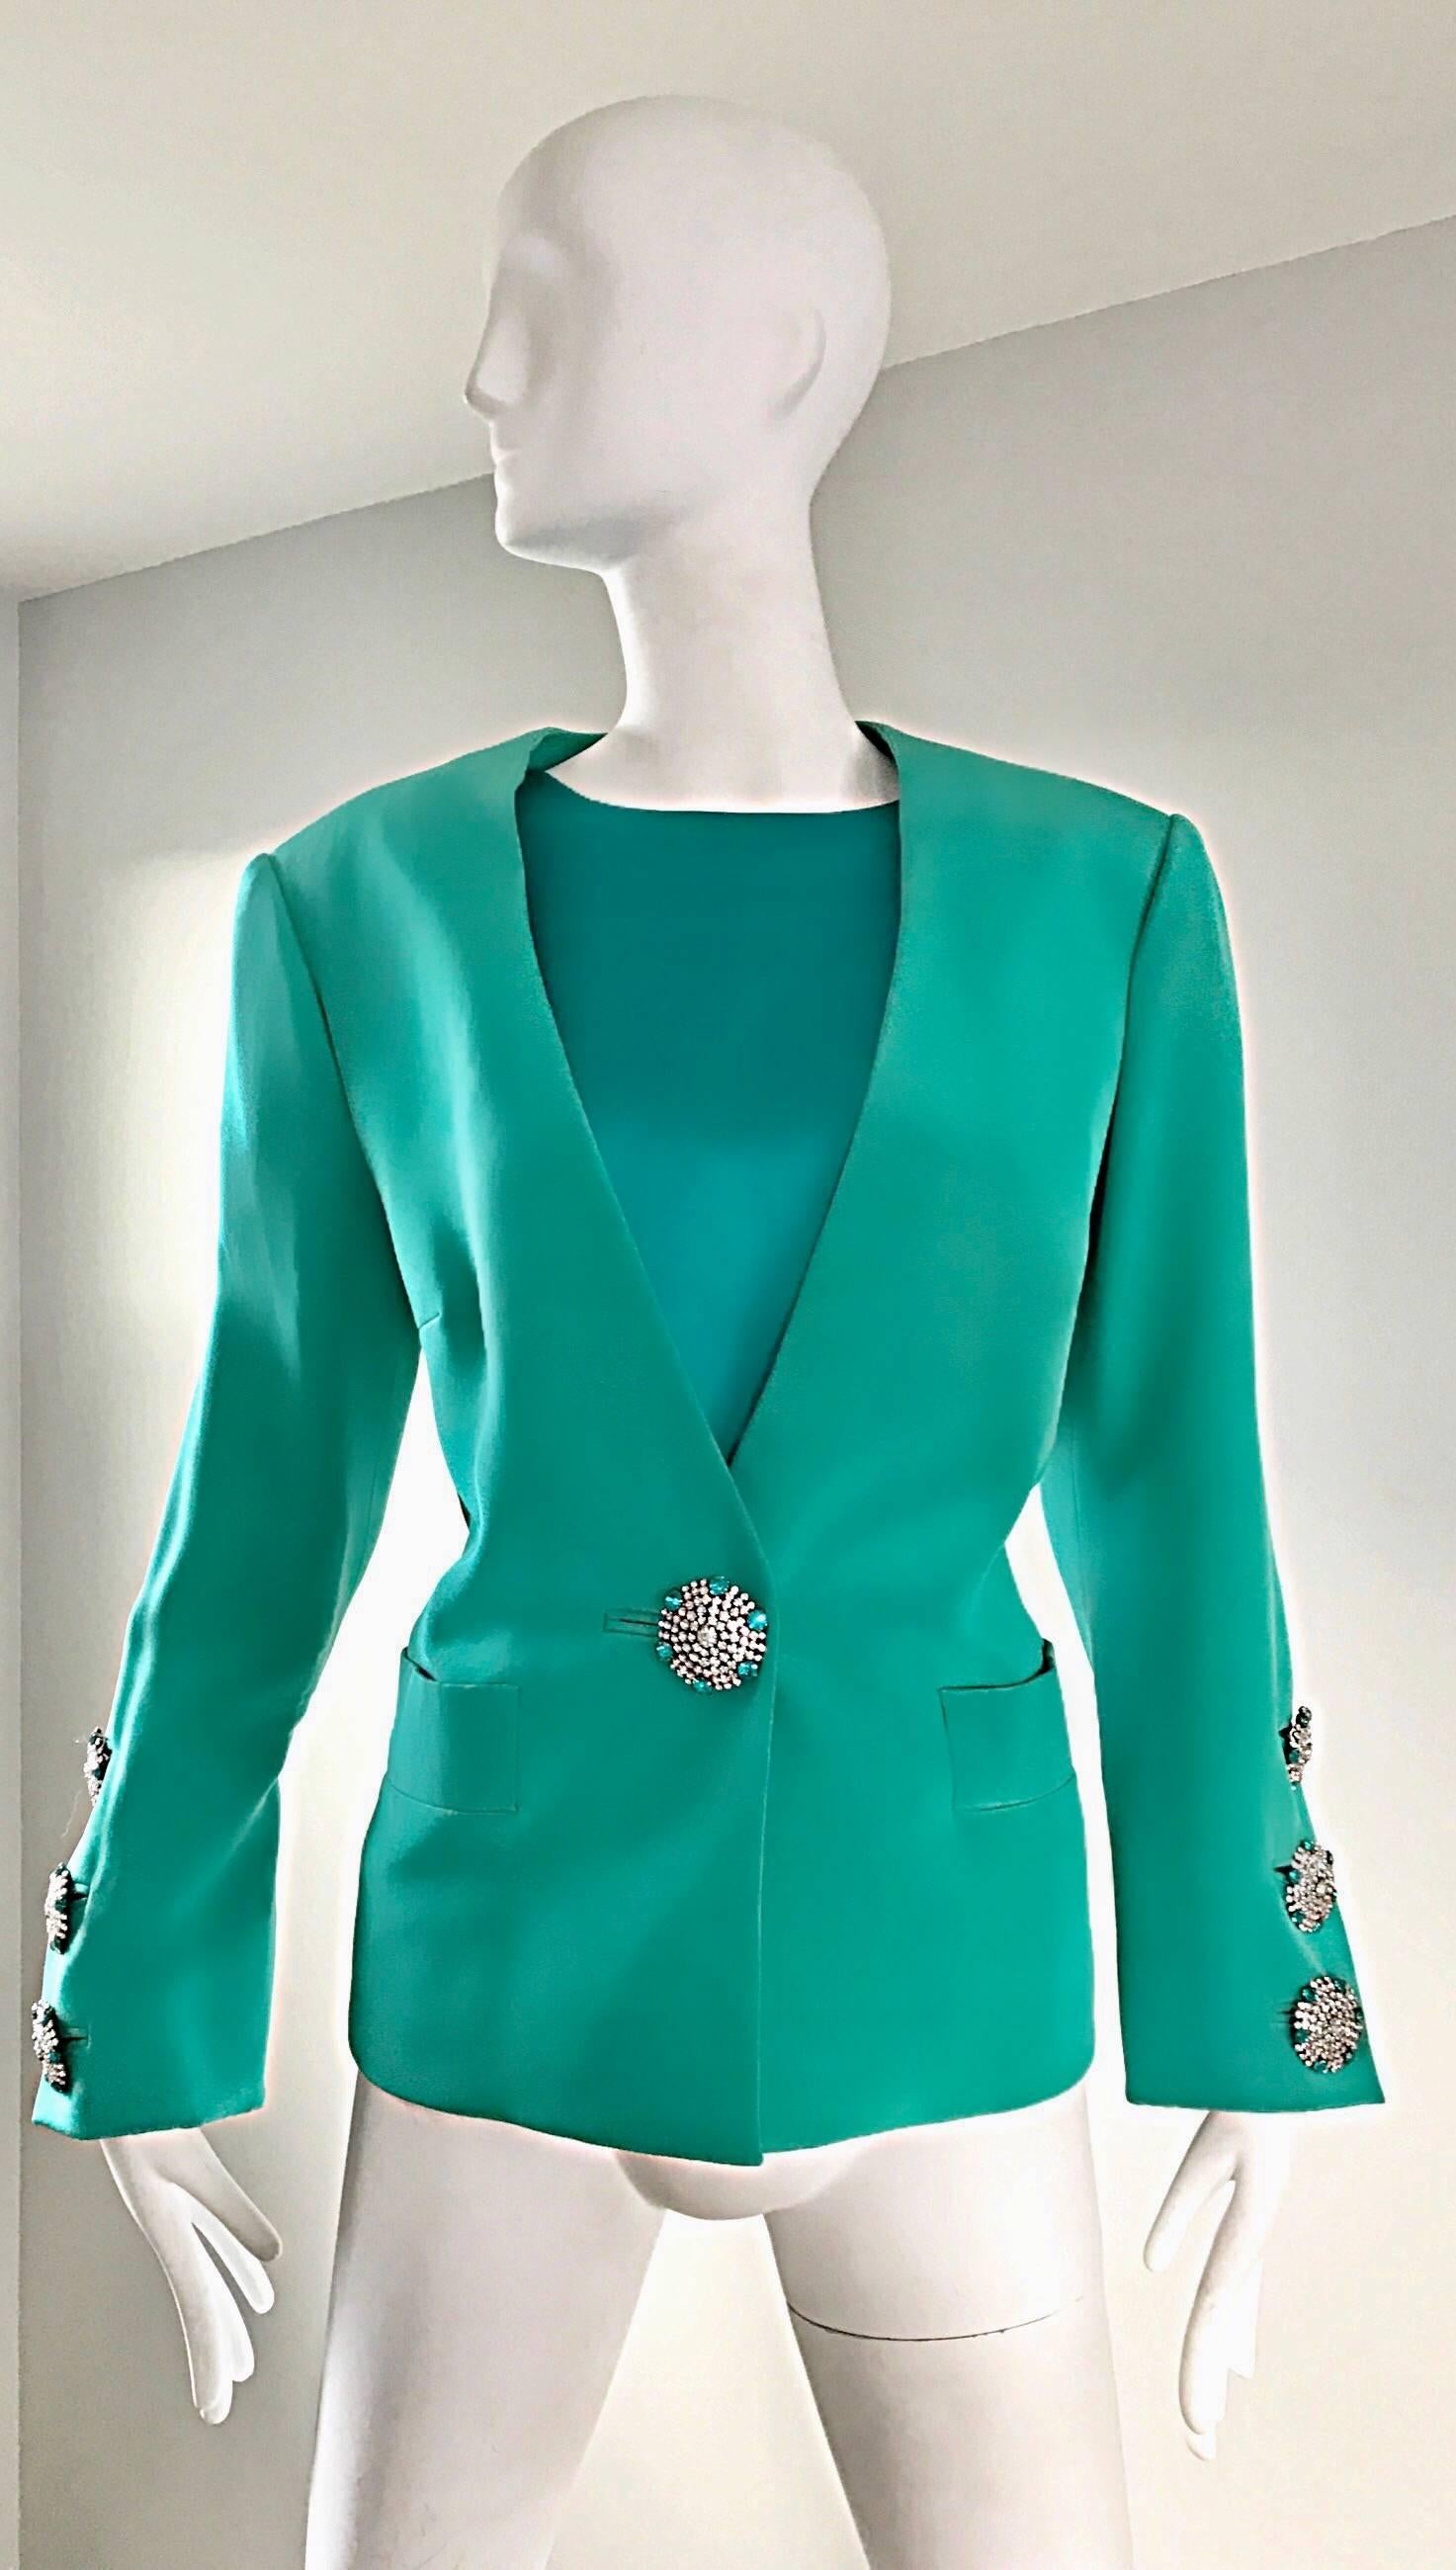 Stunning vintage YVES SAINT LAURENT Haute Couture numbered Kelly green silk jacket and top! Striking vibrant shade of green. Phenomenal diamanté rhinestone oversized buttons--three at each cuff, and one at the front bodice. Two pockets (one at each